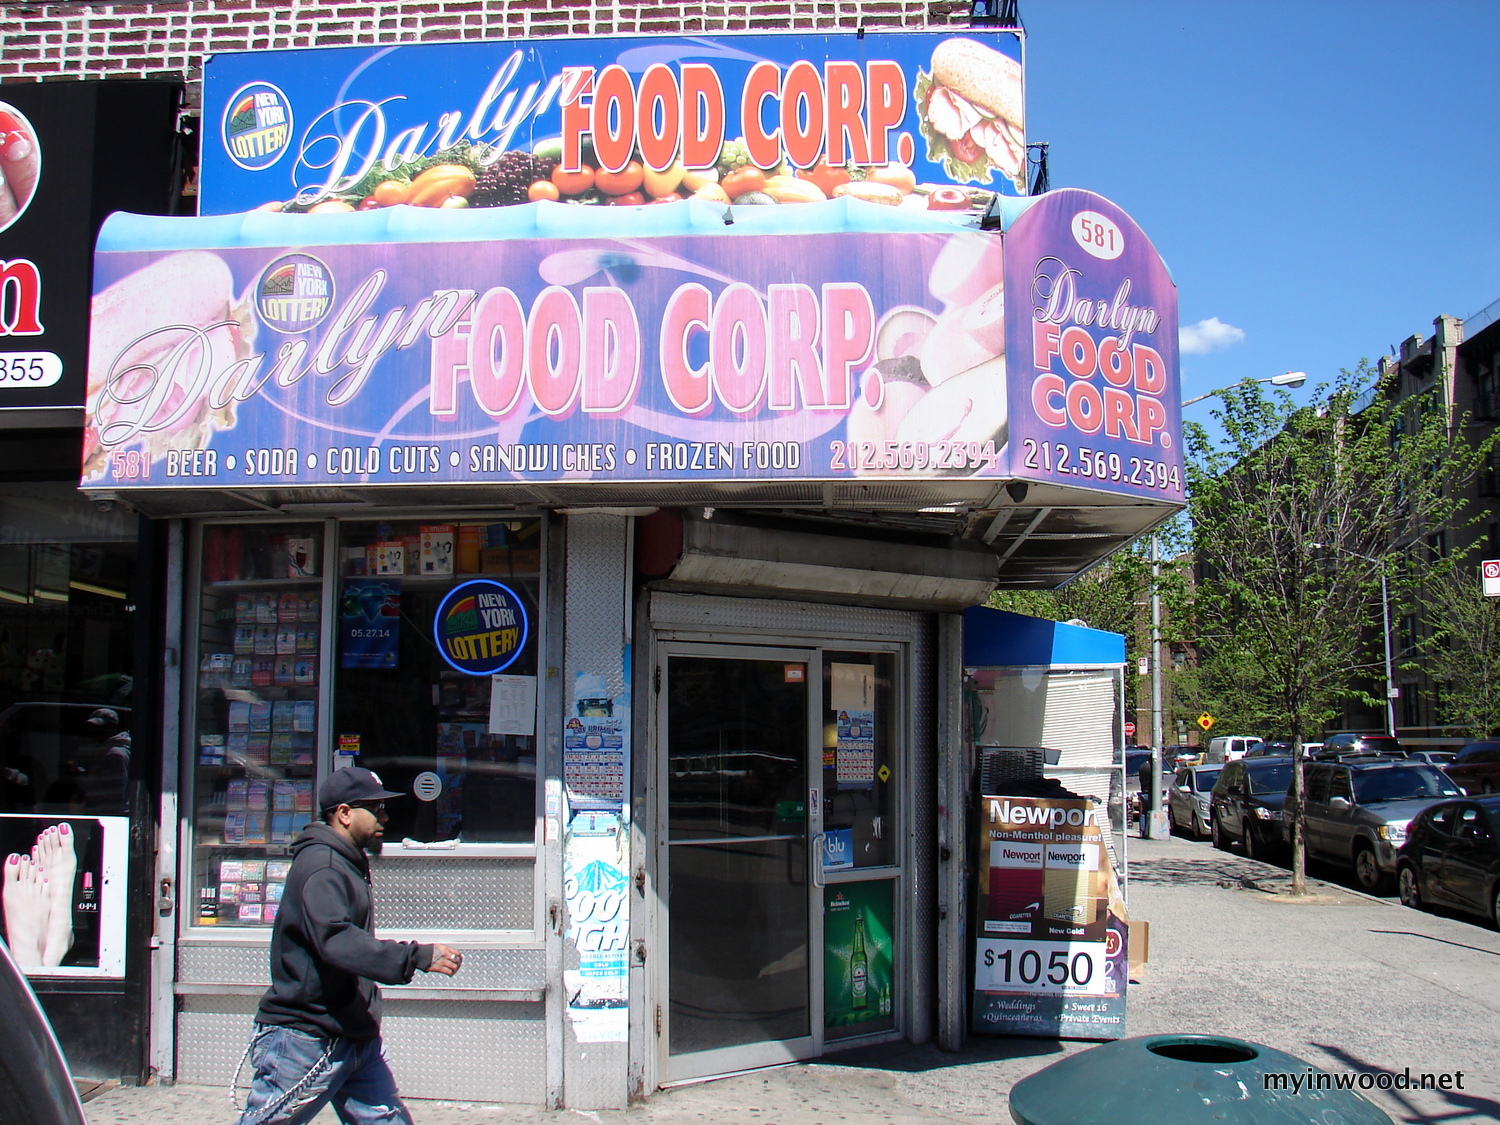 Darlyn Food Corp., 581 West 207th Street in 2014.